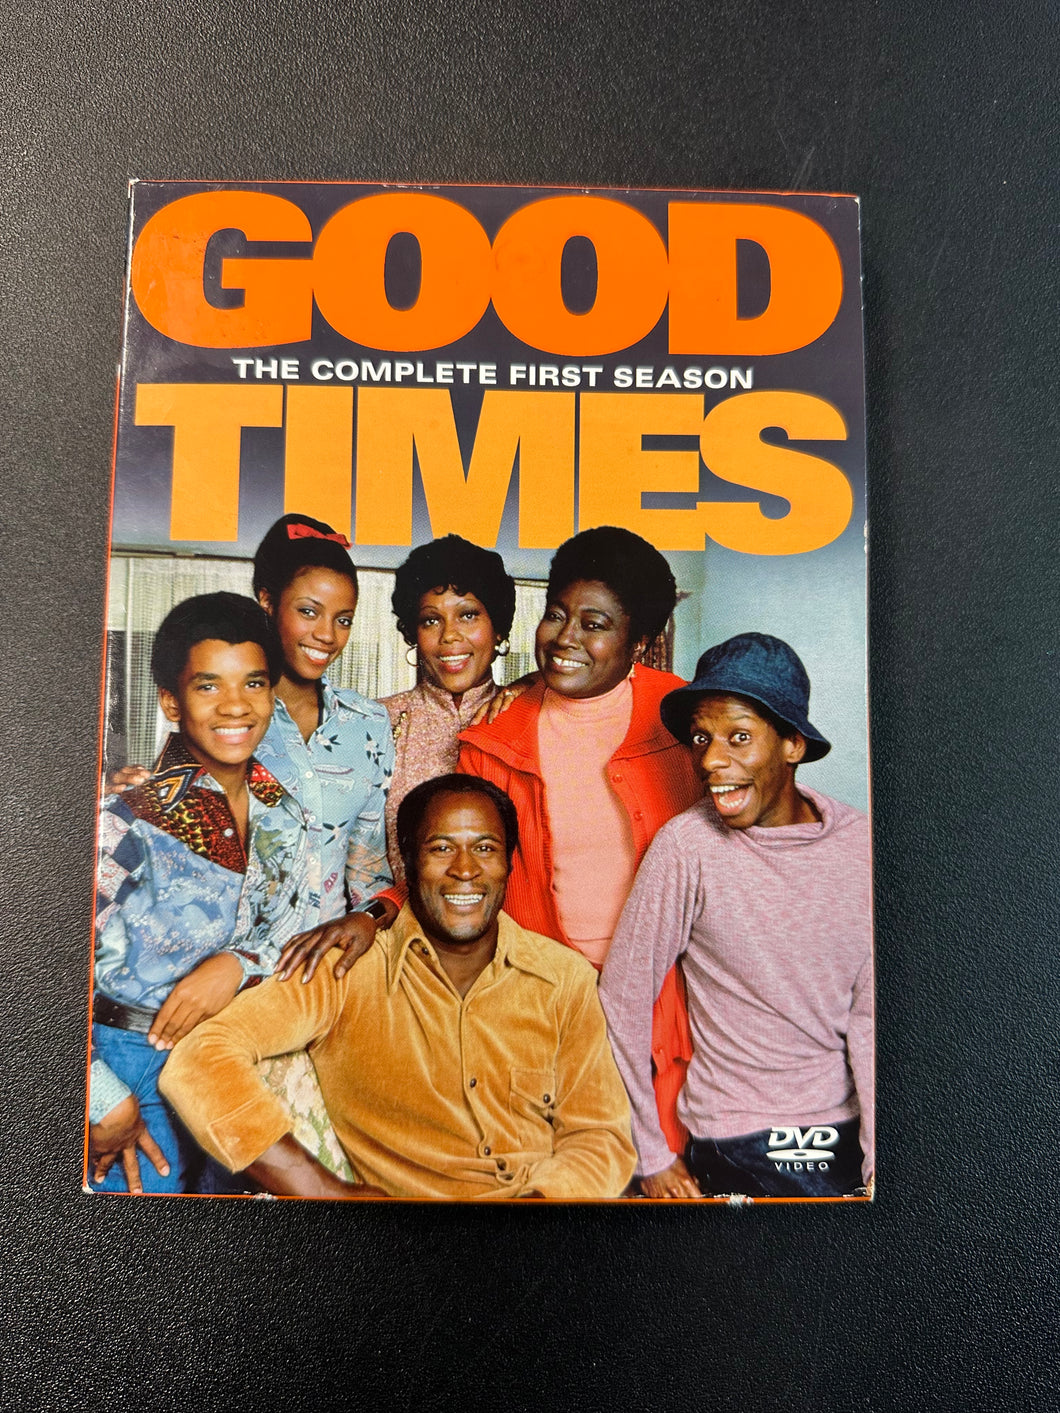 GOOD TIMES The Complete First Season [DVD] 2 Disc PREOWNED